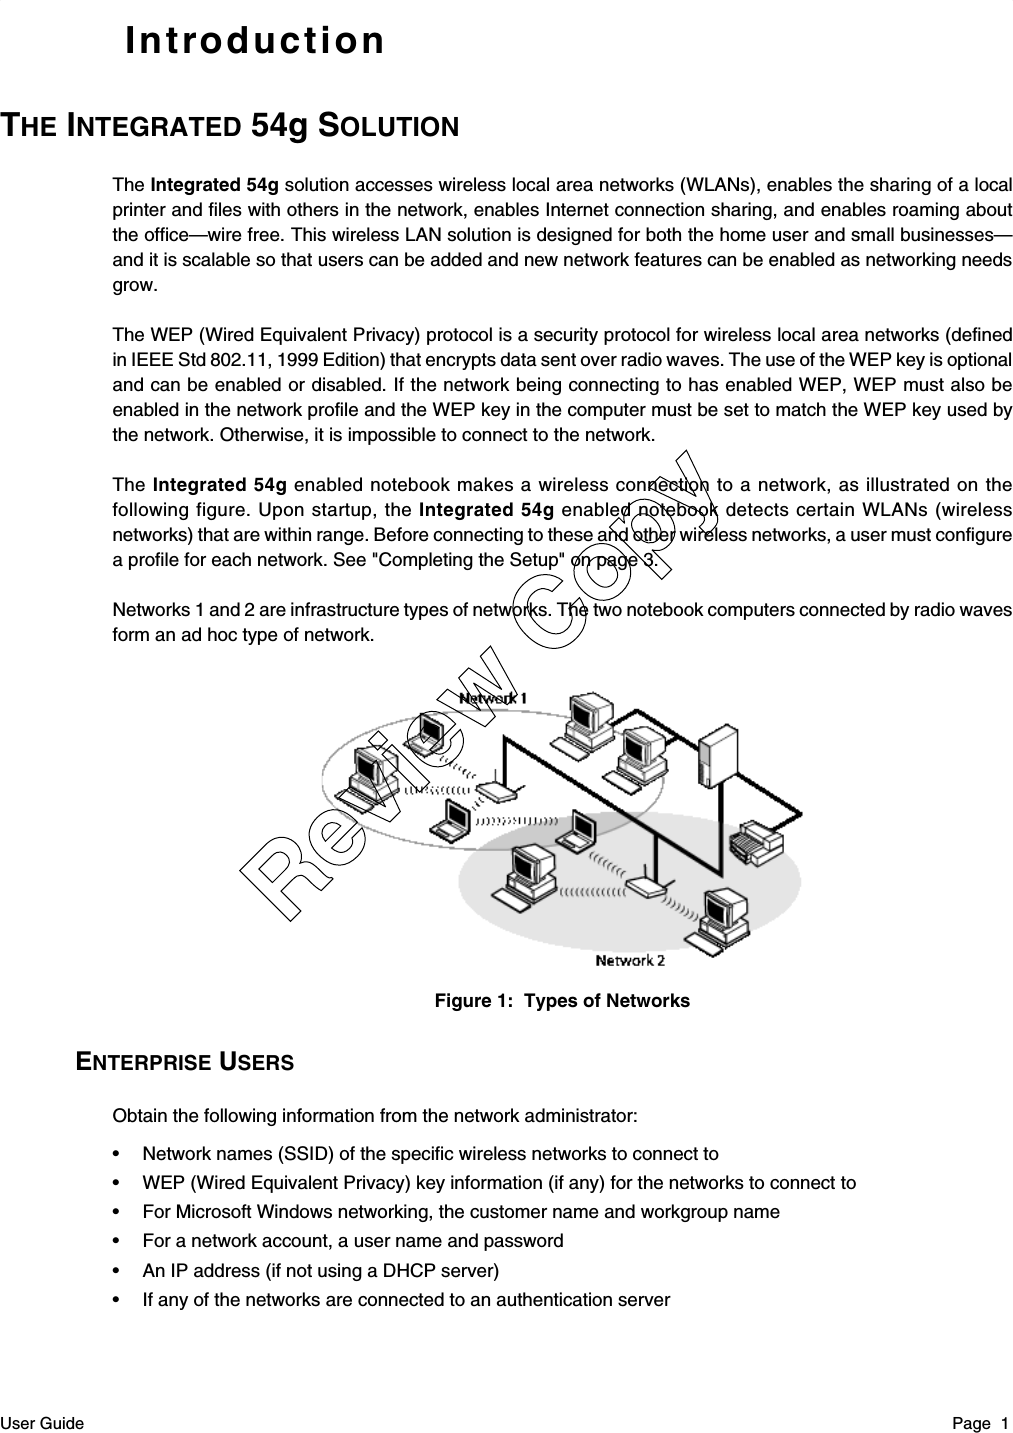 User Guide Page  1IntroductionTHE INTEGRATED 54g SOLUTIONThe Integrated 54g solution accesses wireless local area networks (WLANs), enables the sharing of a localprinter and files with others in the network, enables Internet connection sharing, and enables roaming aboutthe office—wire free. This wireless LAN solution is designed for both the home user and small businesses—and it is scalable so that users can be added and new network features can be enabled as networking needsgrow.The WEP (Wired Equivalent Privacy) protocol is a security protocol for wireless local area networks (definedin IEEE Std 802.11, 1999 Edition) that encrypts data sent over radio waves. The use of the WEP key is optionaland can be enabled or disabled. If the network being connecting to has enabled WEP, WEP must also beenabled in the network profile and the WEP key in the computer must be set to match the WEP key used bythe network. Otherwise, it is impossible to connect to the network.The Integrated 54g enabled notebook makes a wireless connection to a network, as illustrated on thefollowing figure. Upon startup, the Integrated 54g enabled notebook detects certain WLANs (wirelessnetworks) that are within range. Before connecting to these and other wireless networks, a user must configurea profile for each network. See &quot;Completing the Setup&quot; on page 3.Networks 1 and 2 are infrastructure types of networks. The two notebook computers connected by radio wavesform an ad hoc type of network.Figure 1:  Types of NetworksENTERPRISE USERSObtain the following information from the network administrator:• Network names (SSID) of the specific wireless networks to connect to• WEP (Wired Equivalent Privacy) key information (if any) for the networks to connect to• For Microsoft Windows networking, the customer name and workgroup name• For a network account, a user name and password• An IP address (if not using a DHCP server)• If any of the networks are connected to an authentication serverReview Copy